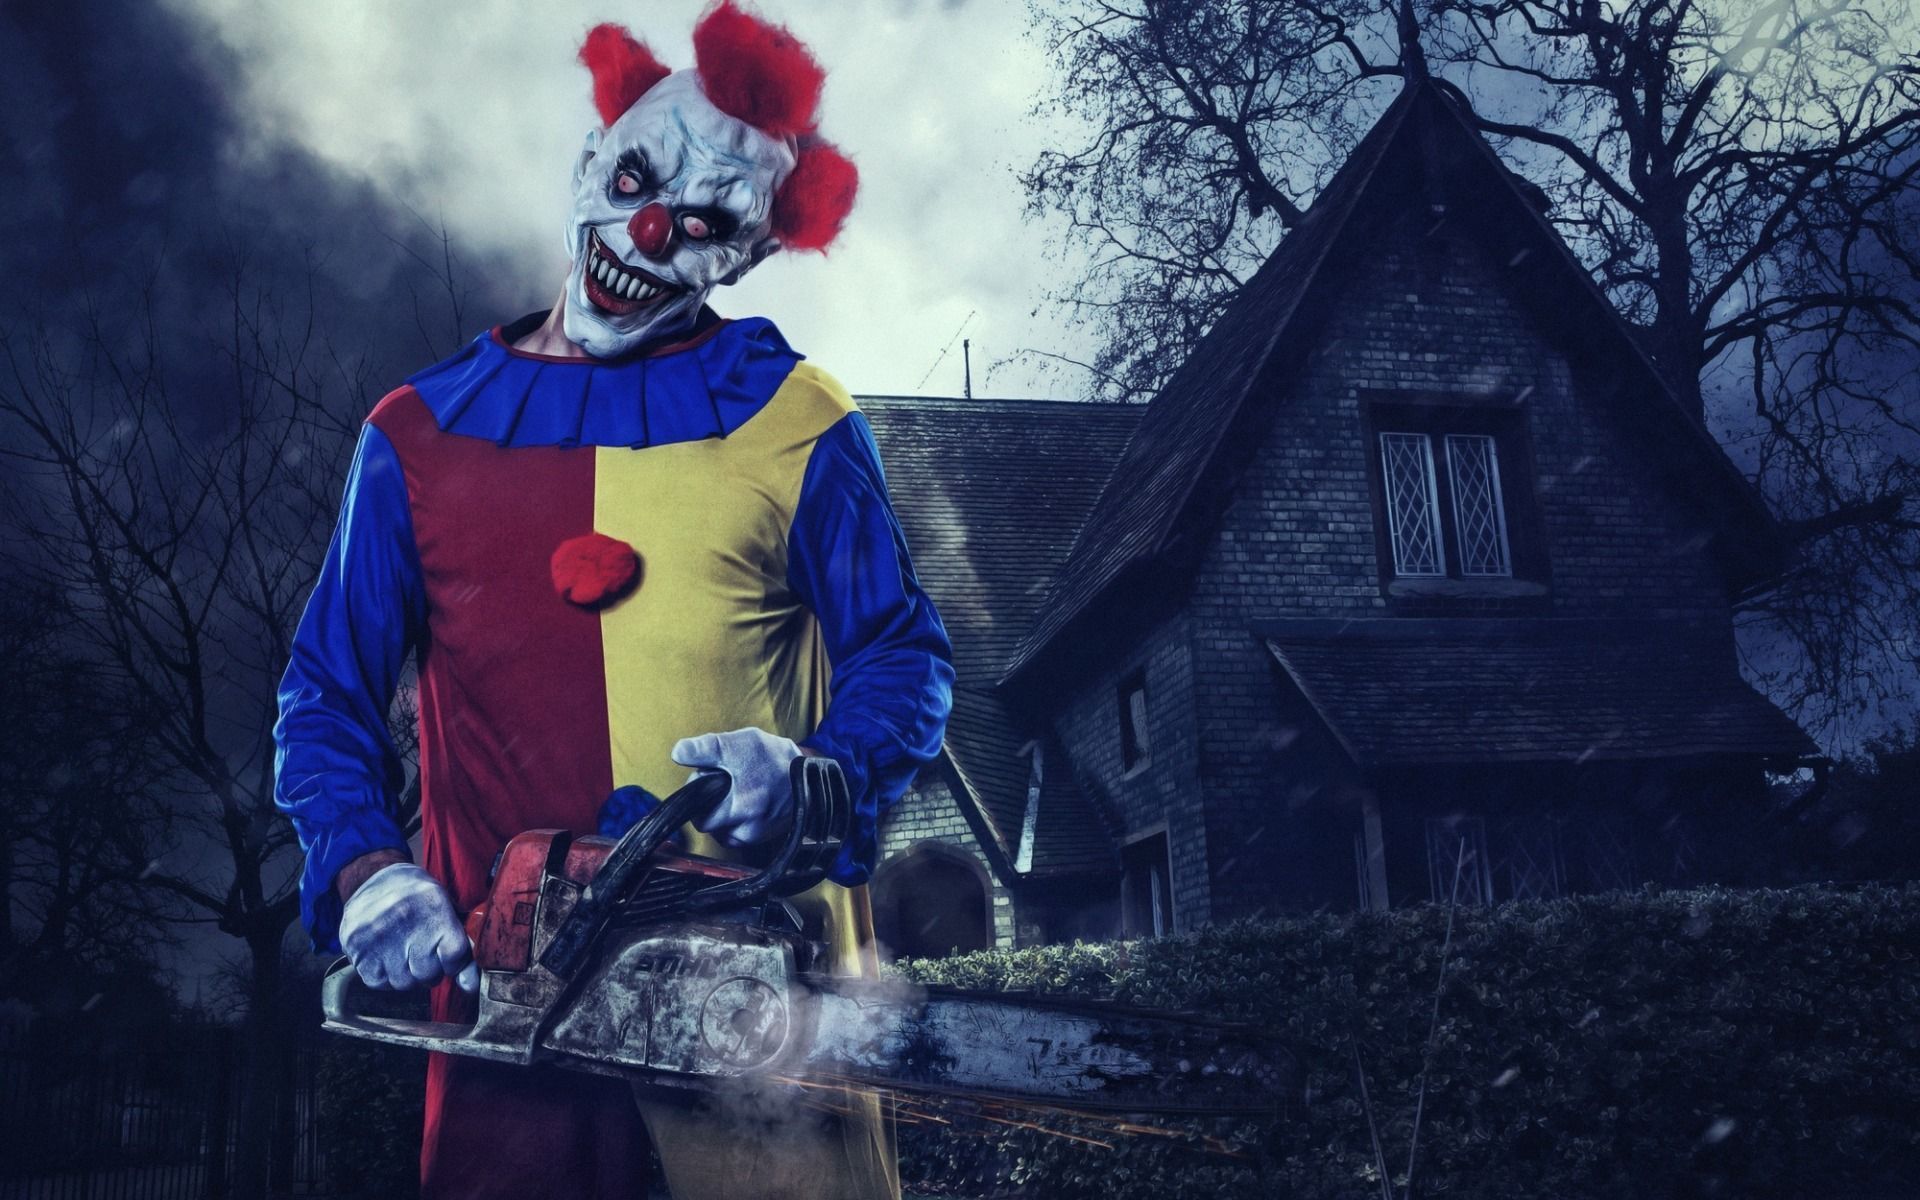 A clown holding an axe in front of his face - Clown